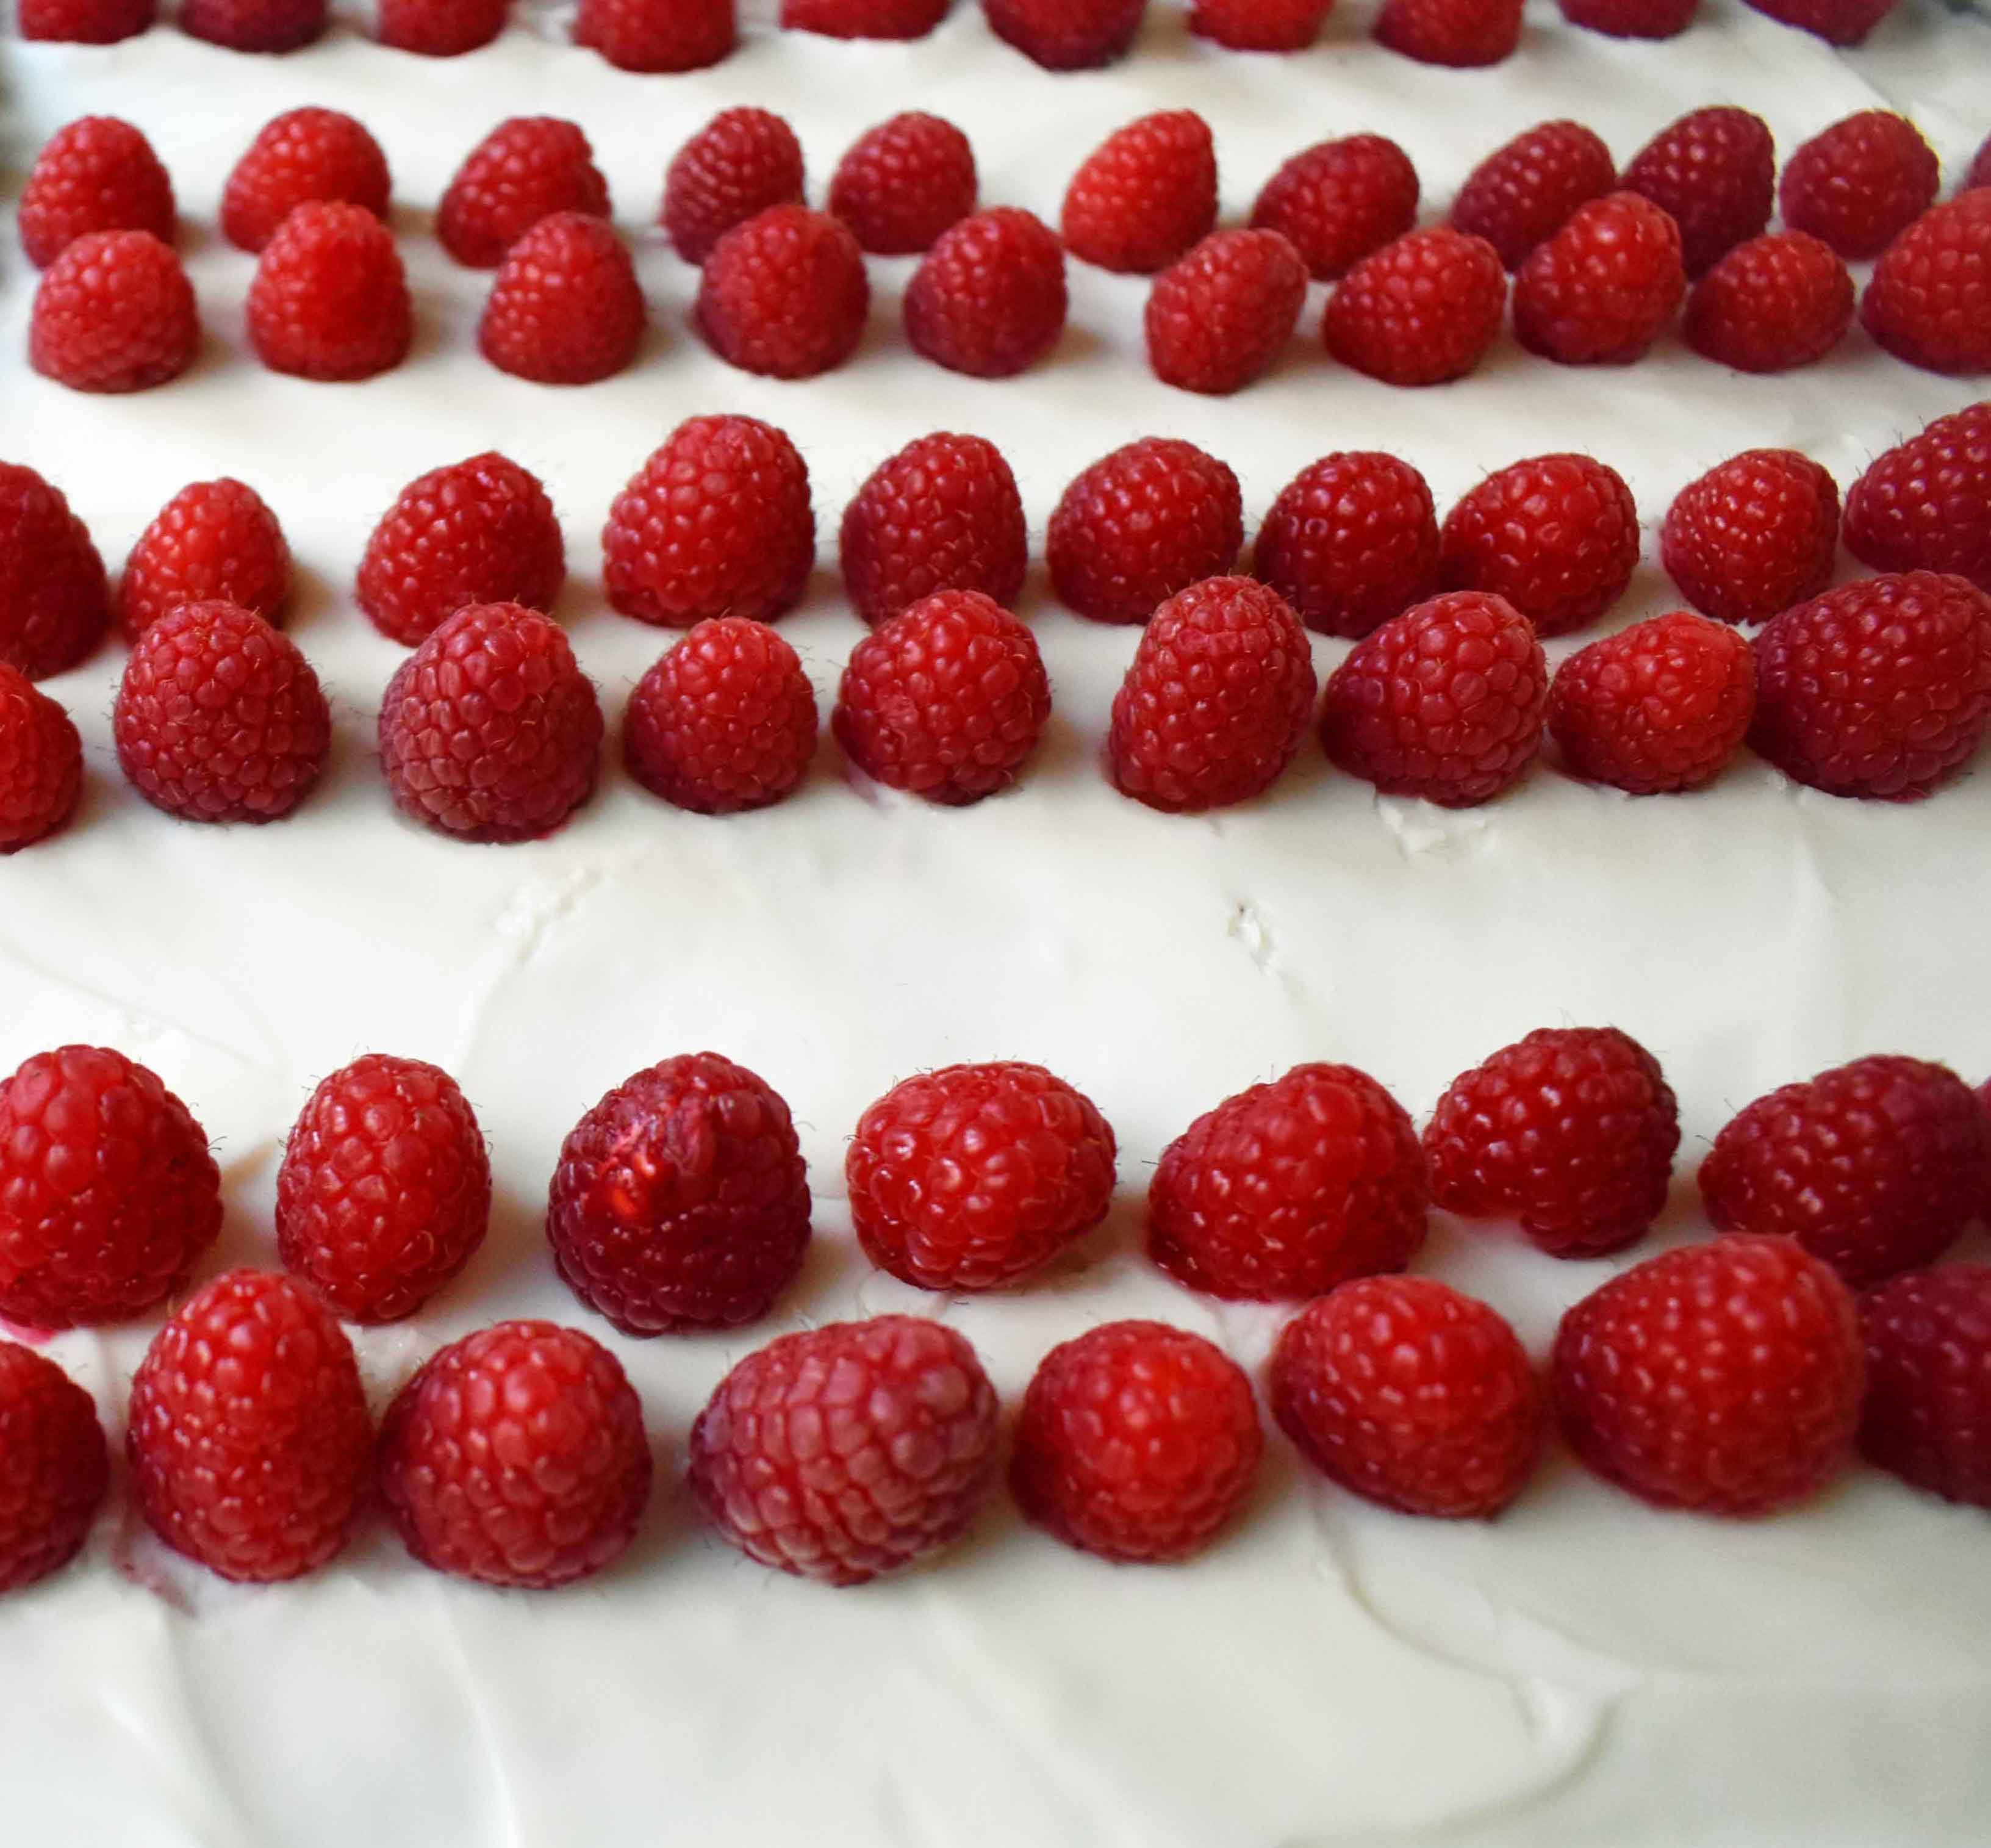 Vanilla Almond White Texas Sheet Cake. A vanilla white cake poured to a jelly roll pan and baked until moist and tender. Topped with almond cream cheese frosting and fresh berries. Perfect flag cake for a 4th of July celebration. www.modernhoney.com